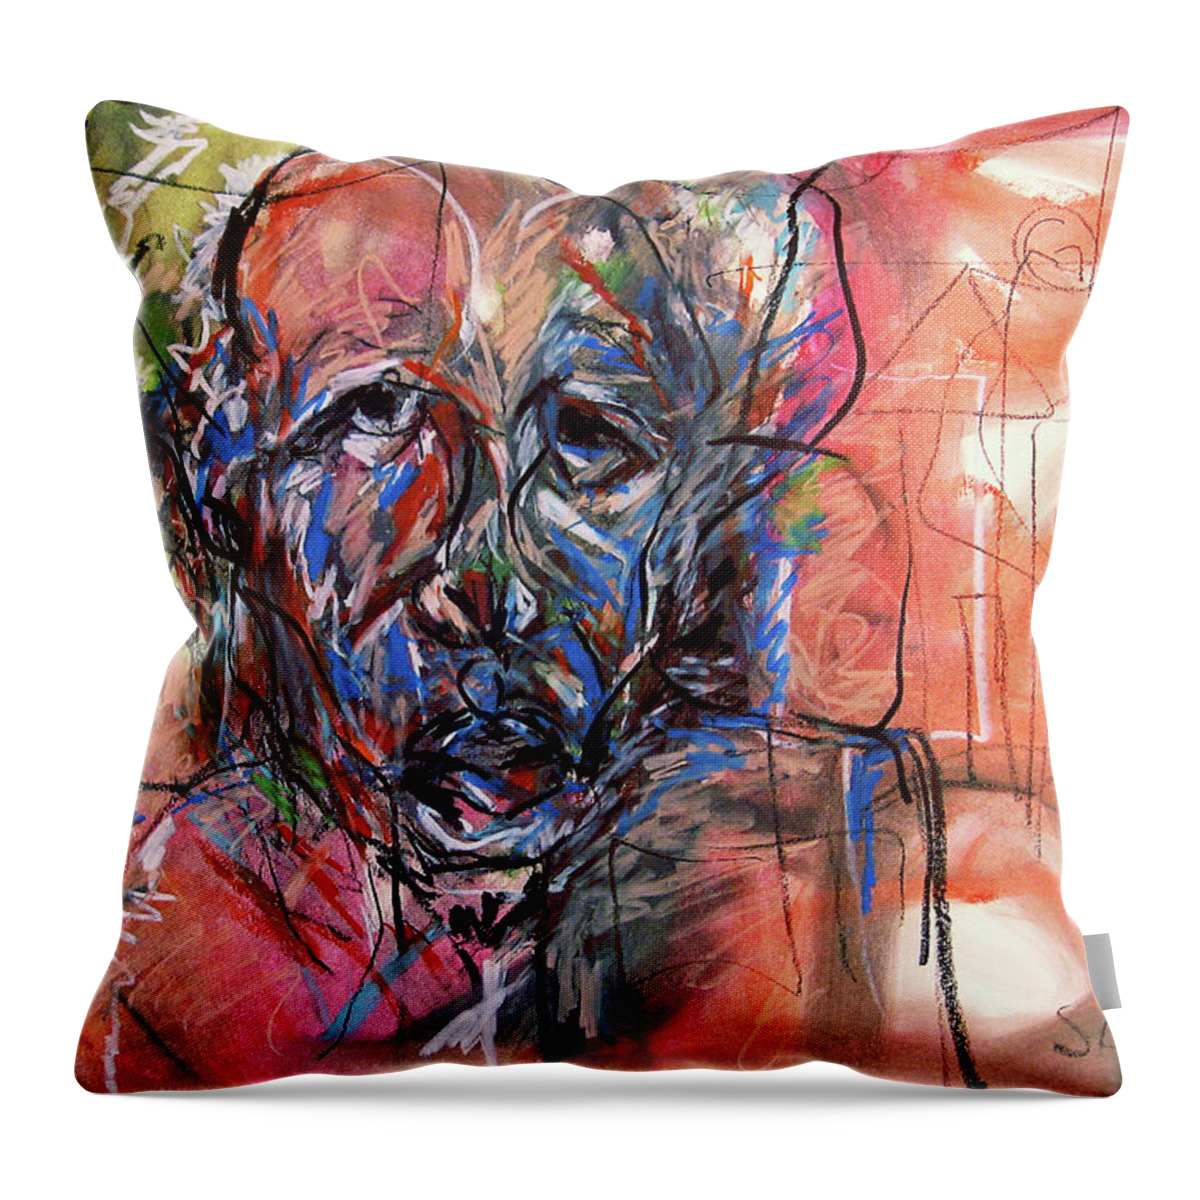 African Art Throw Pillow featuring the painting The Man I See by Winston Saoli 1950-1995